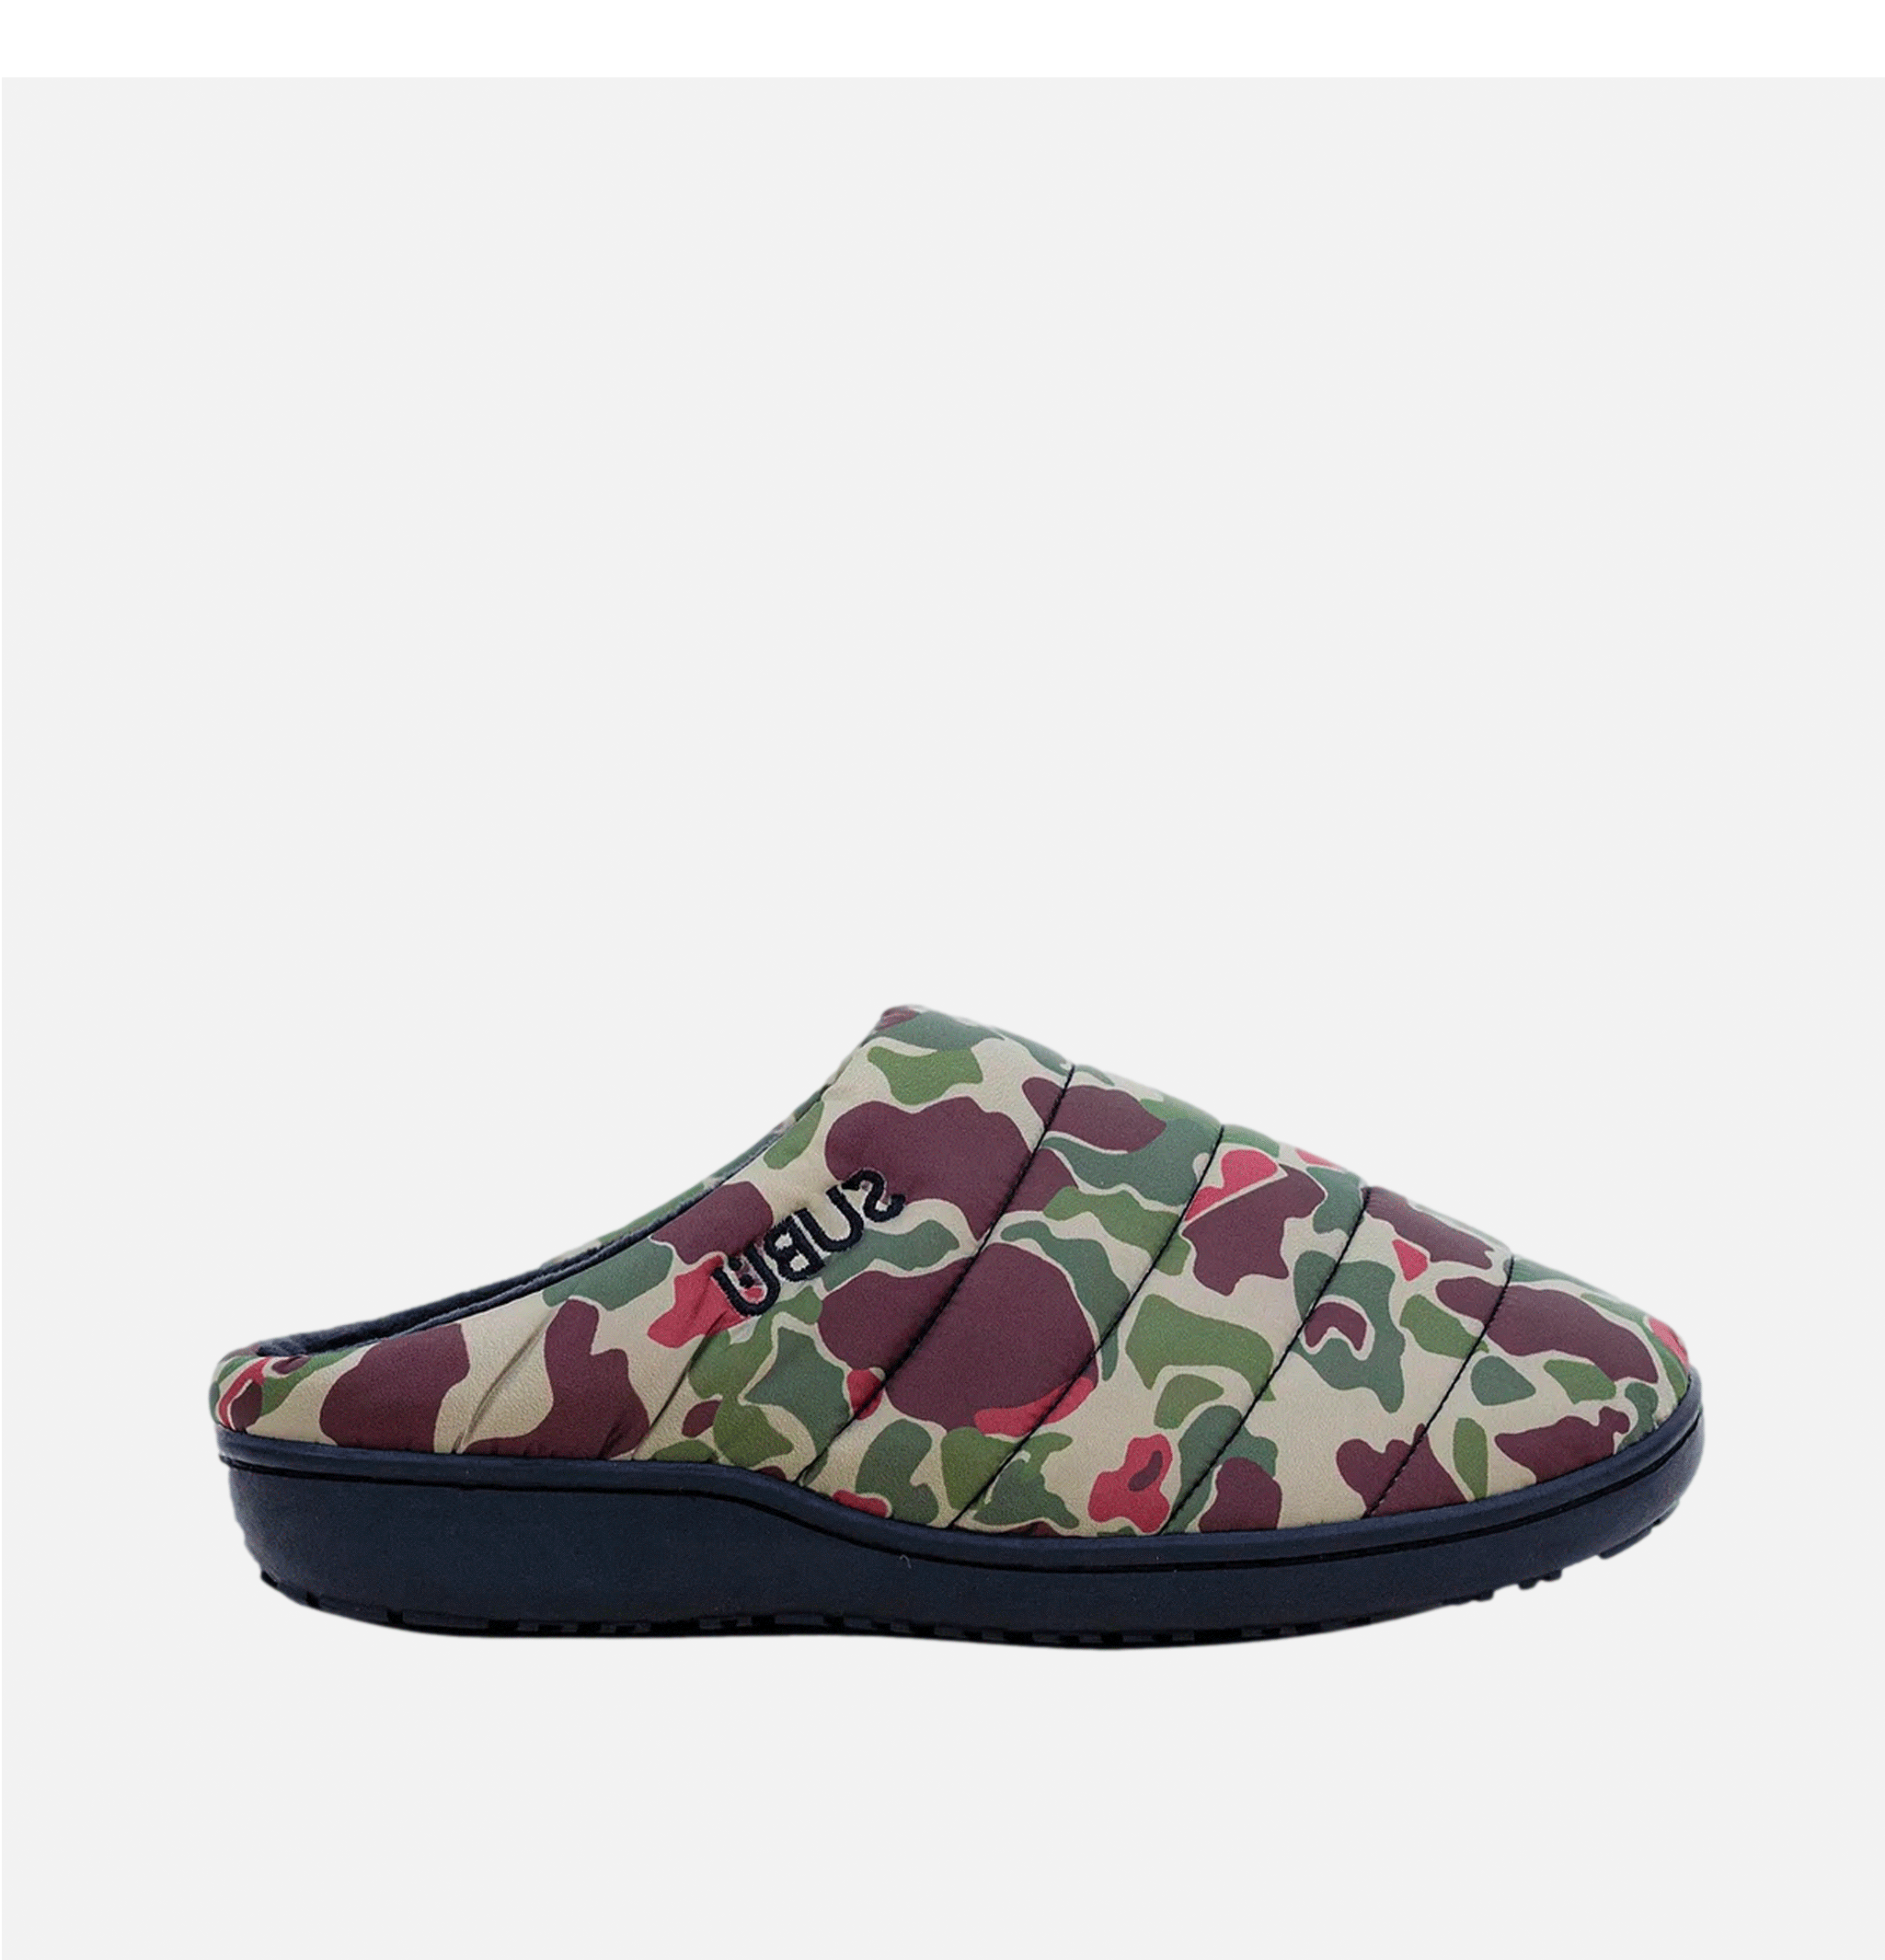 Subu Tokyo Uneveness Slippers Camouflage